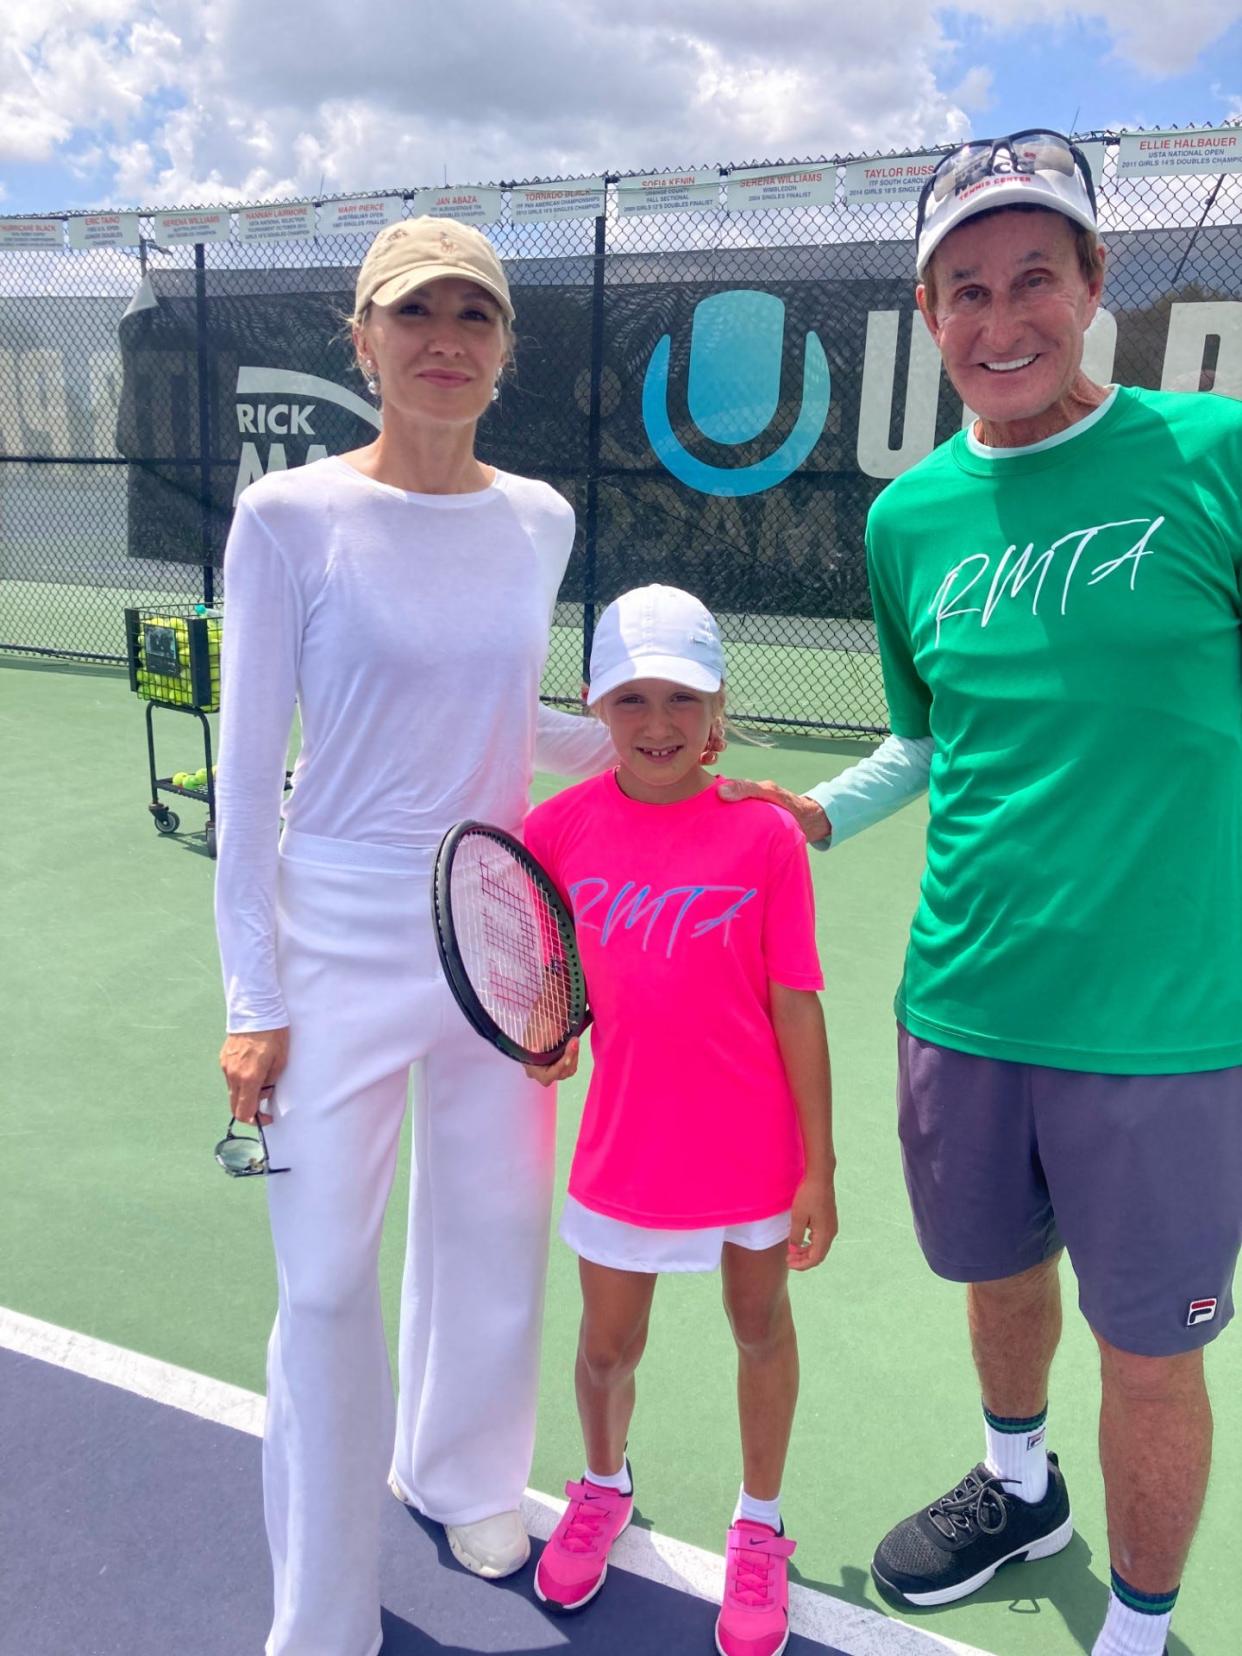 Maryna Hrancher and her daughter Vlada pose with Rick Macci on the court at Boca Raton's Rick Macci Tennis Academy.